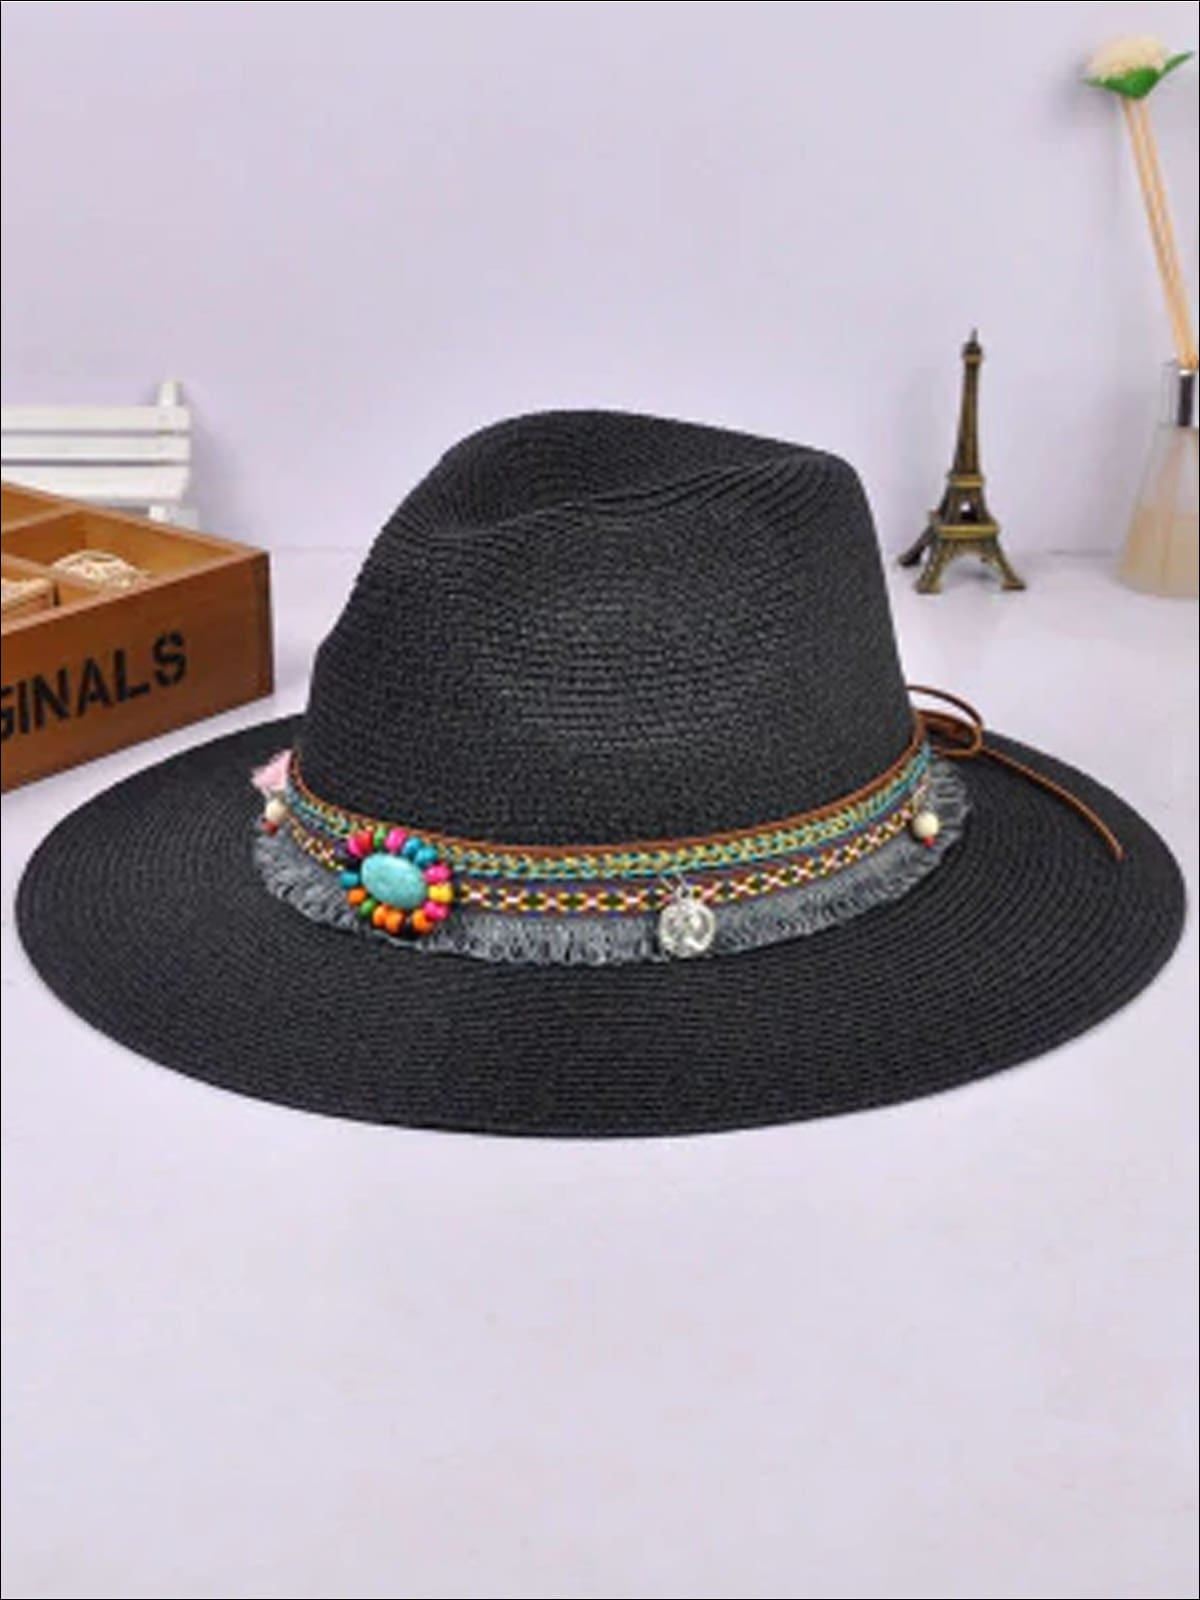 Womens Vintage Jazz Hat With Tribal Appliques - Black - Womens Accessories